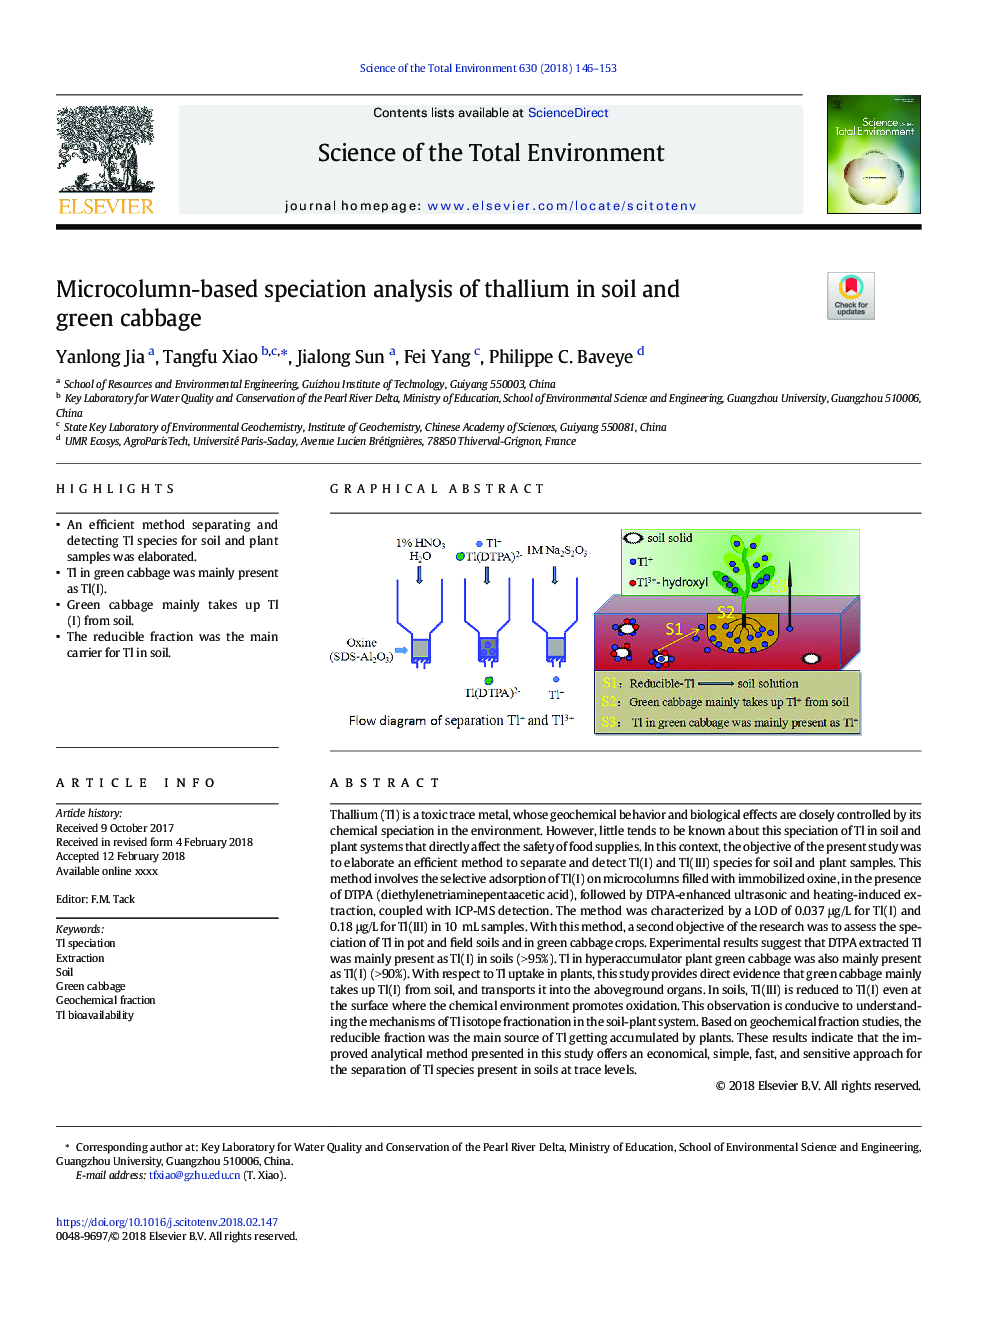 Microcolumn-based speciation analysis of thallium in soil and green cabbage